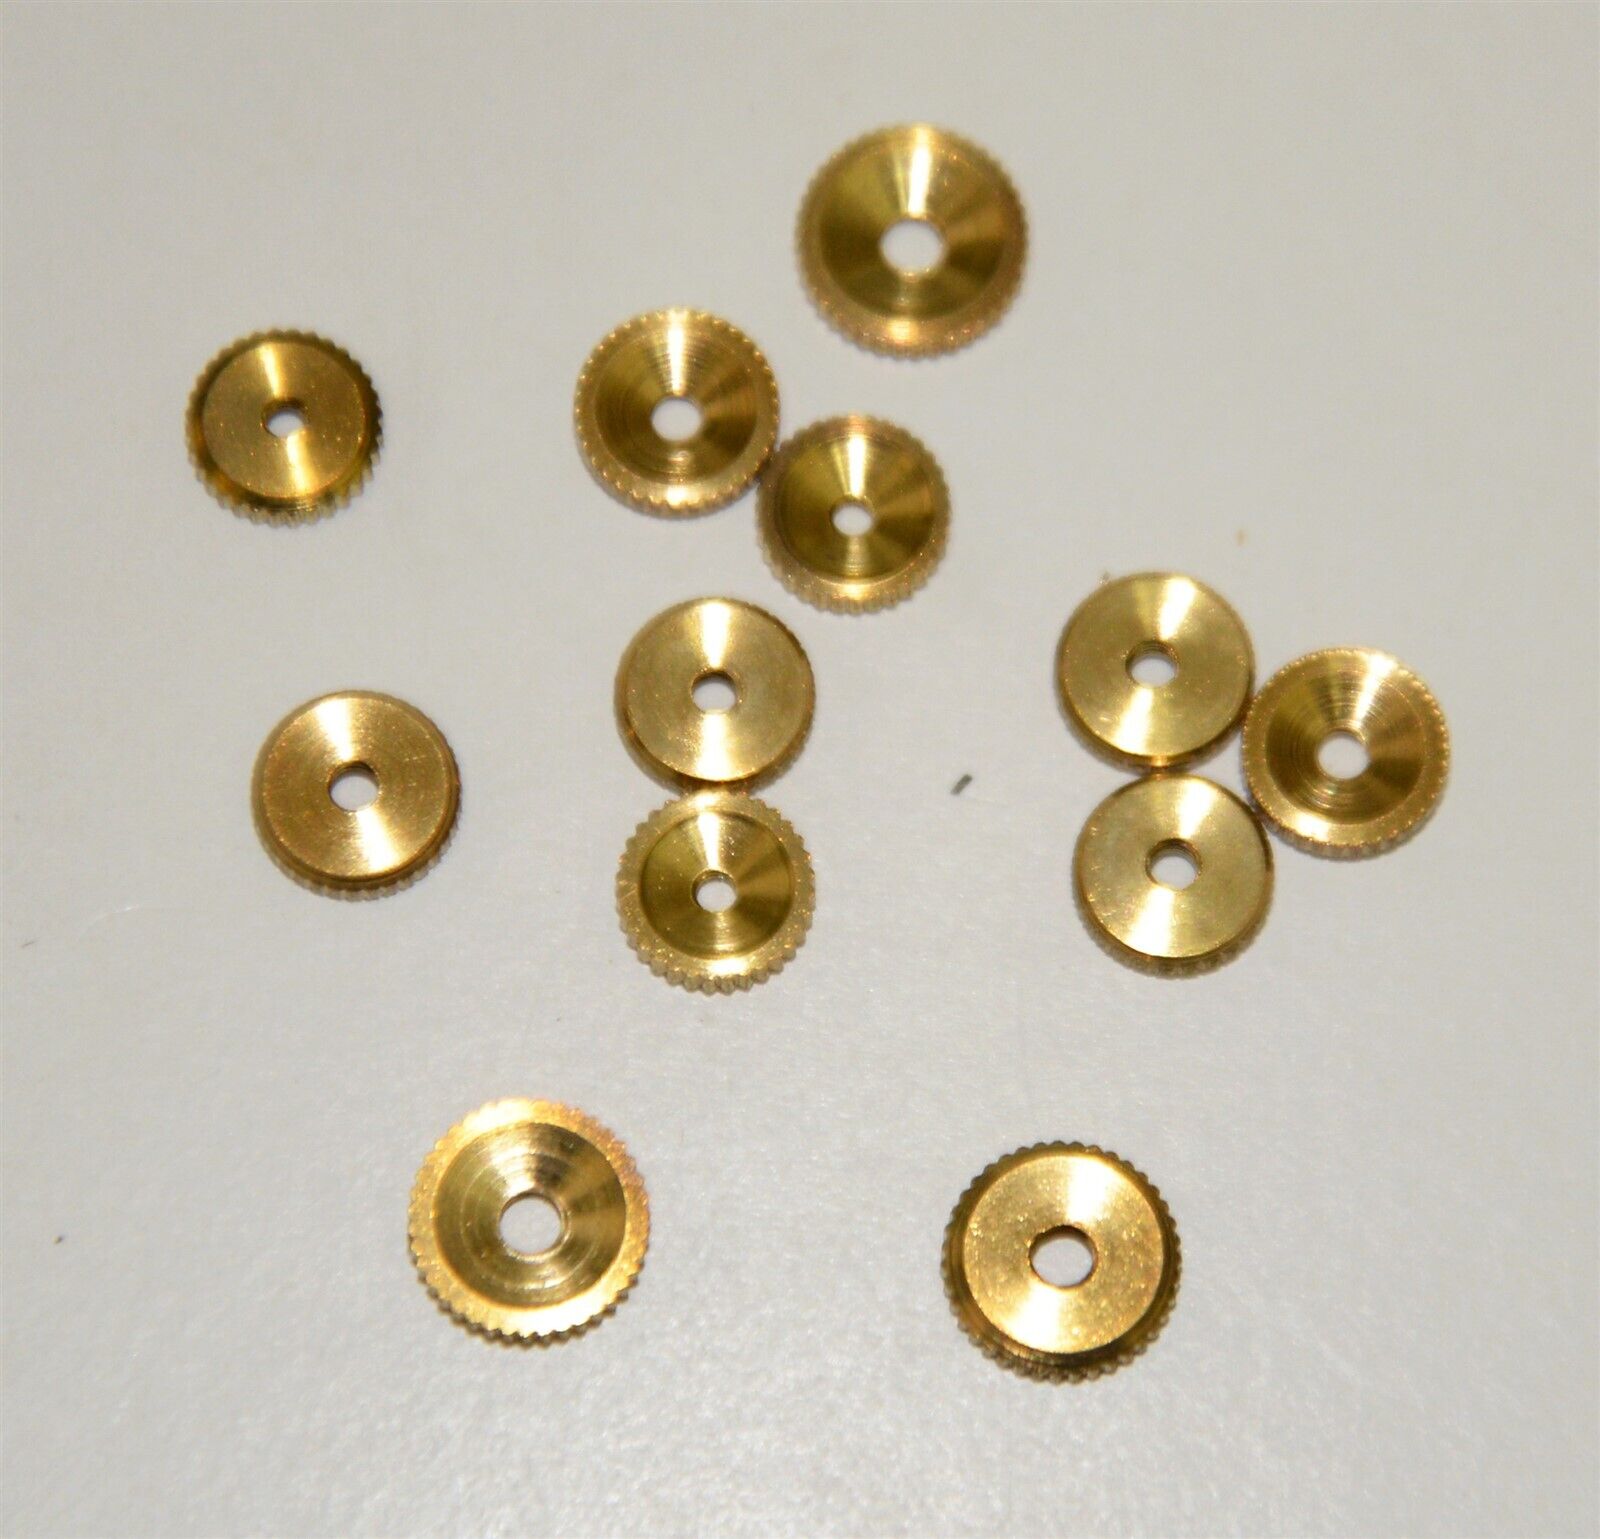 Assortment of 12 Hand Nuts for American Clocks